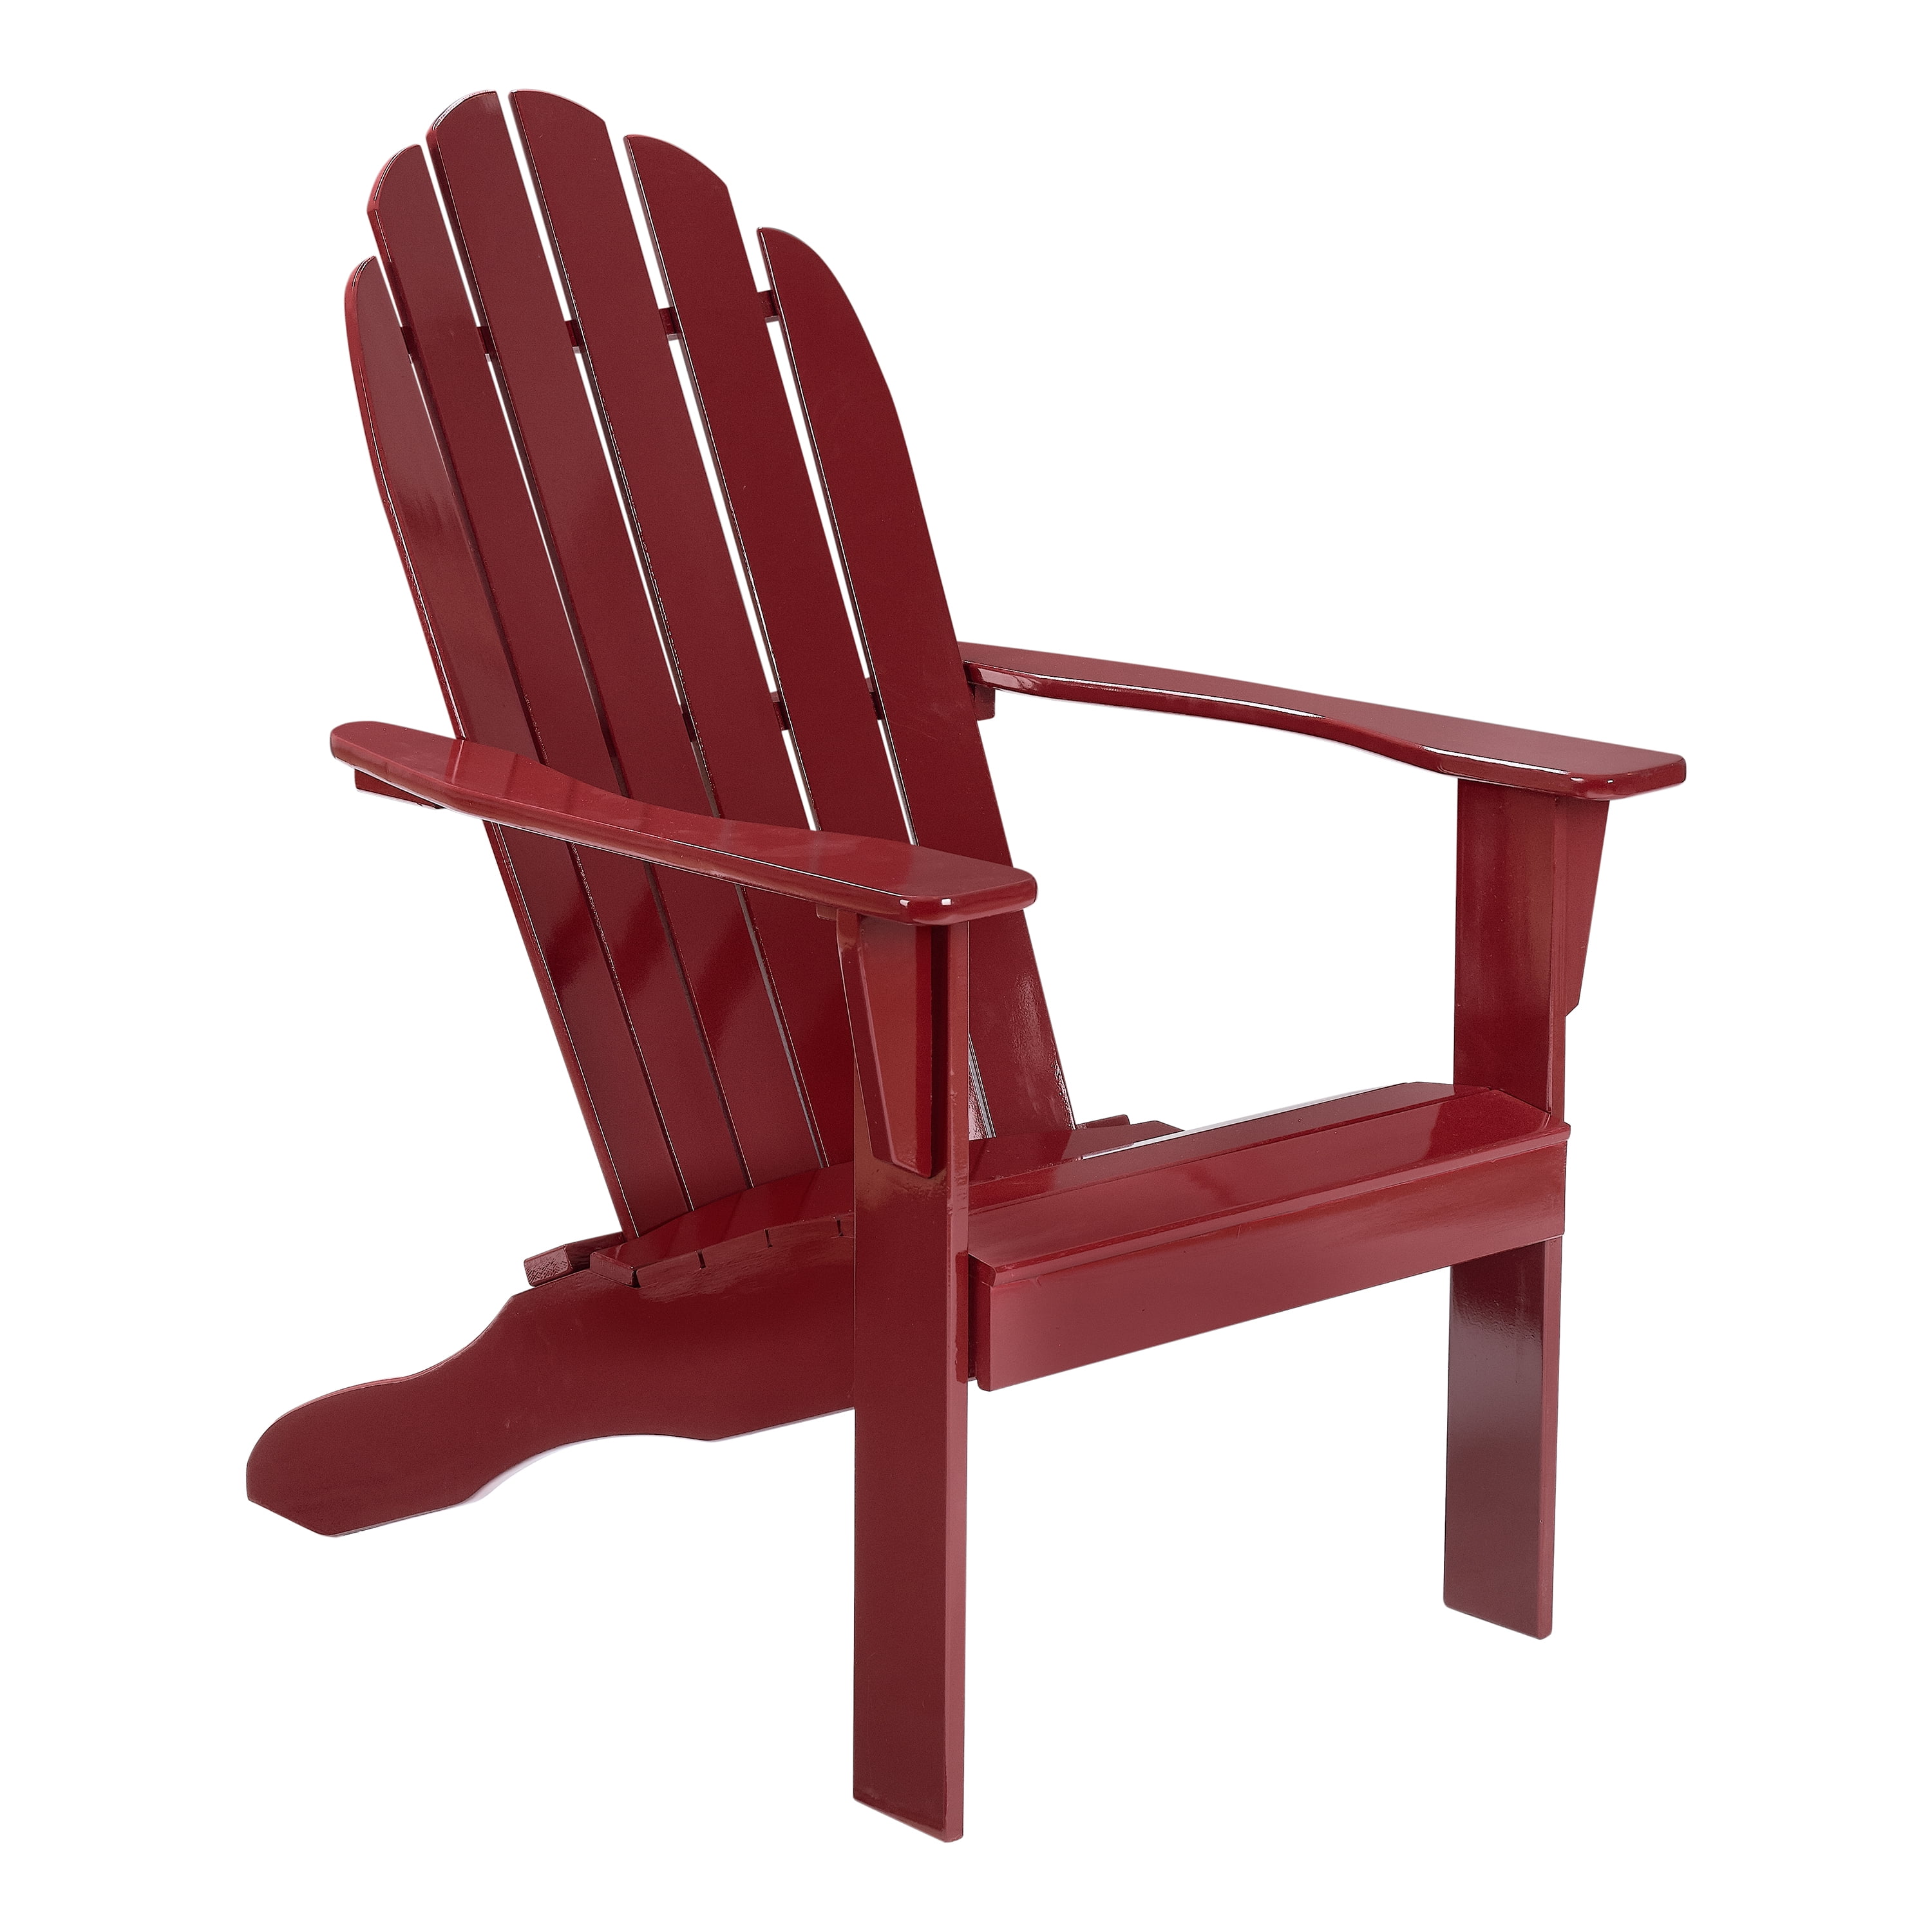 Mainstays Wooden Outdoor Adirondack Chair, Red Finish